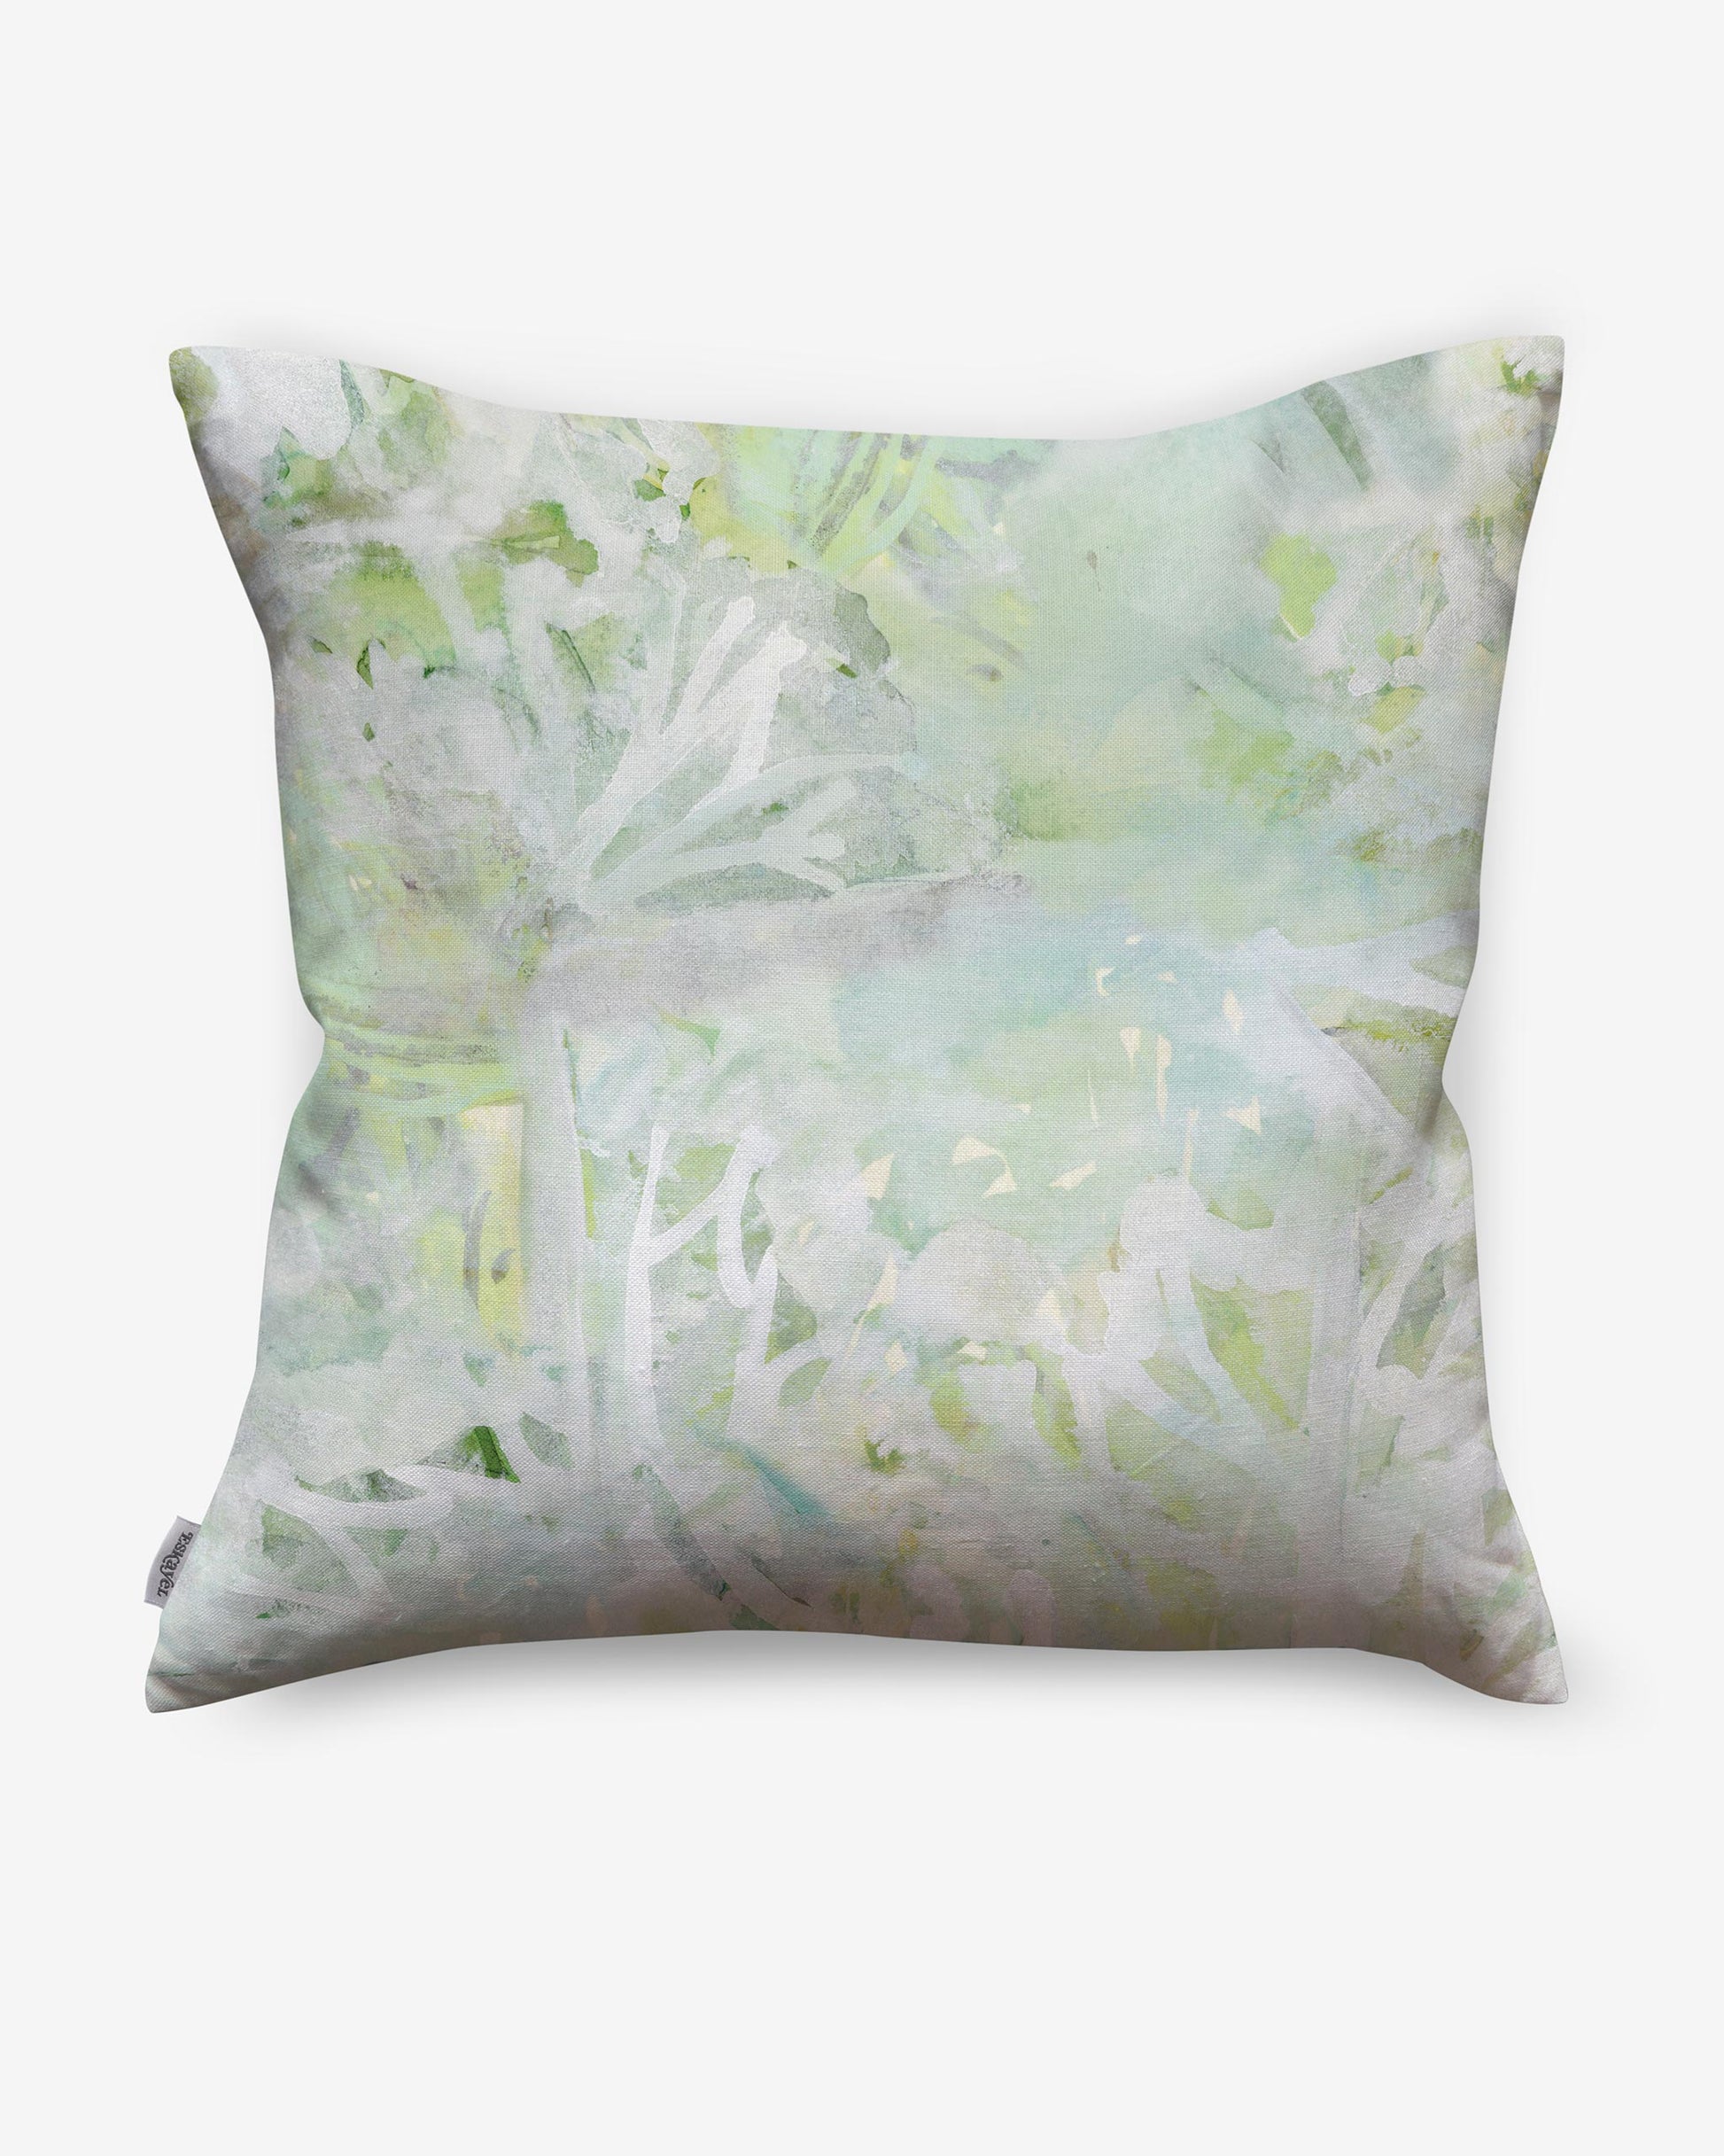 A Cortile Pillow with a soft watercolor pattern on it